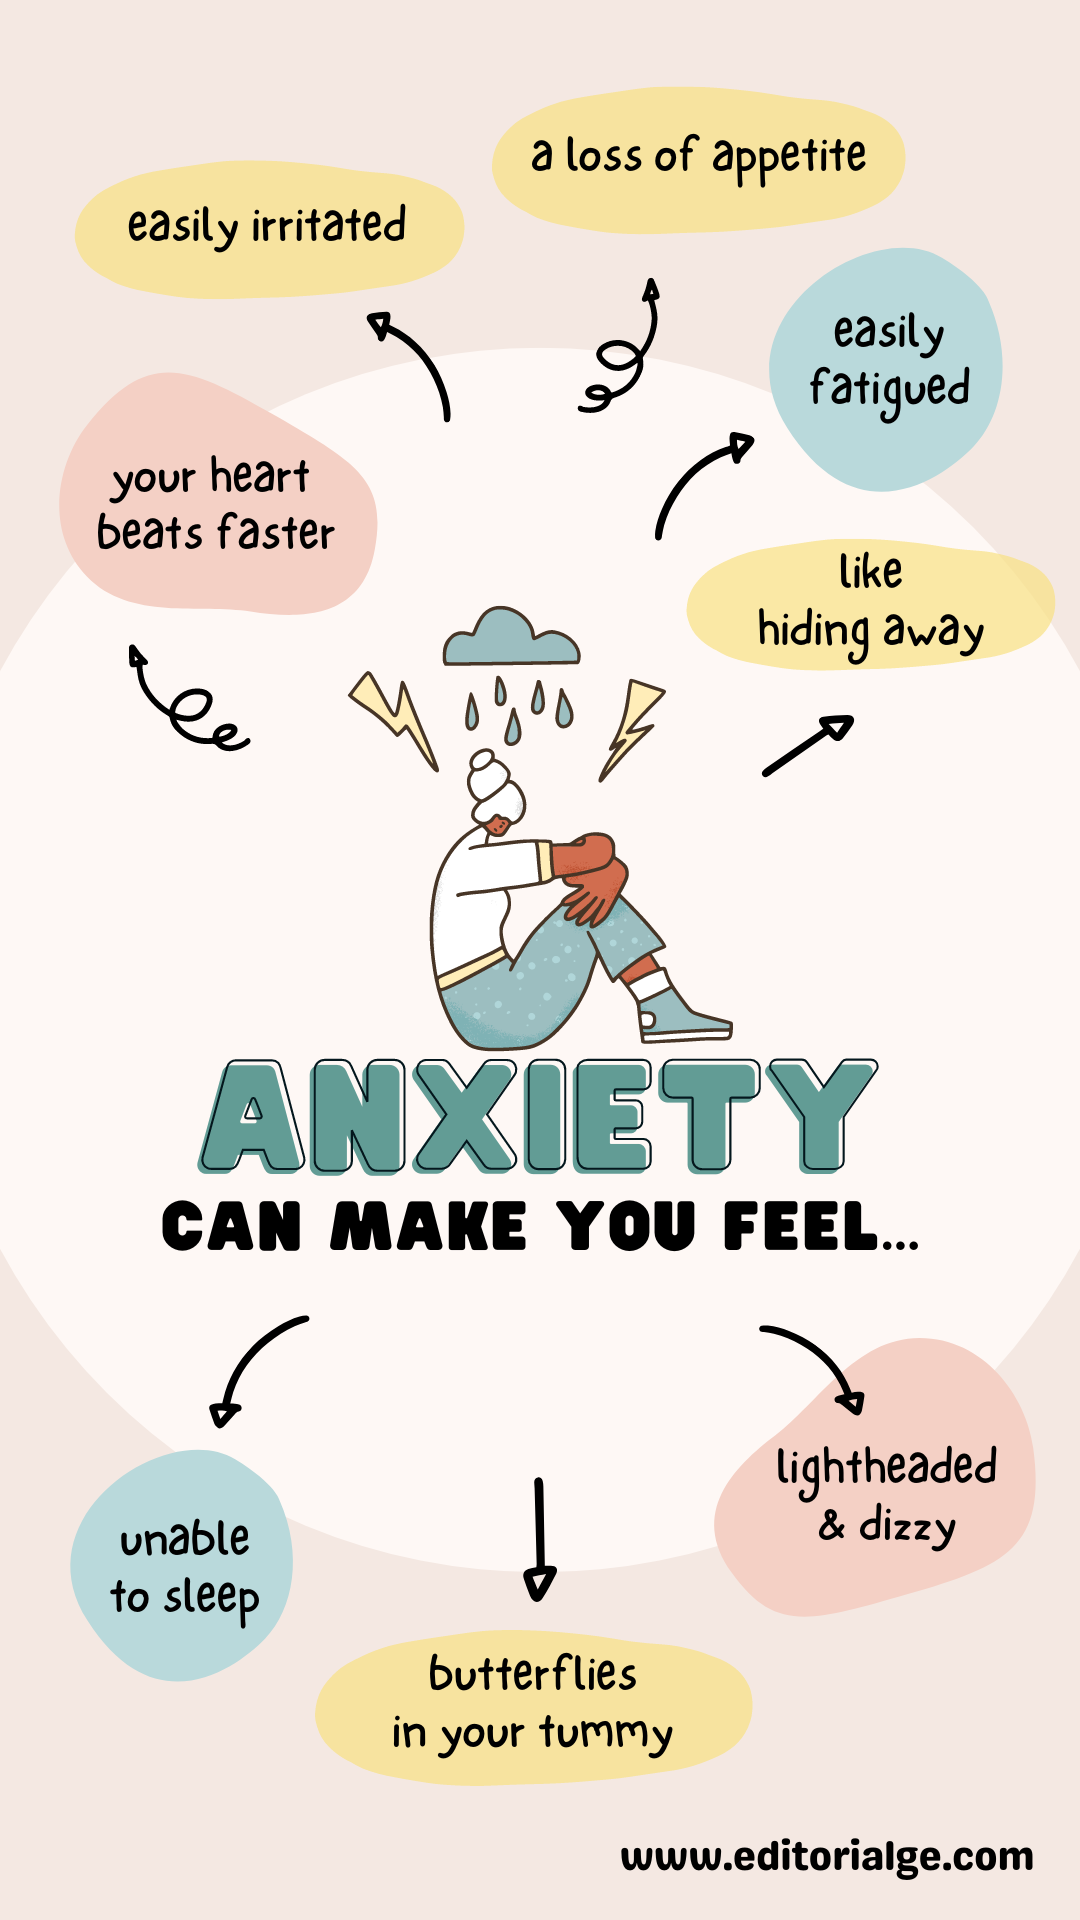 anxiety makes you feel